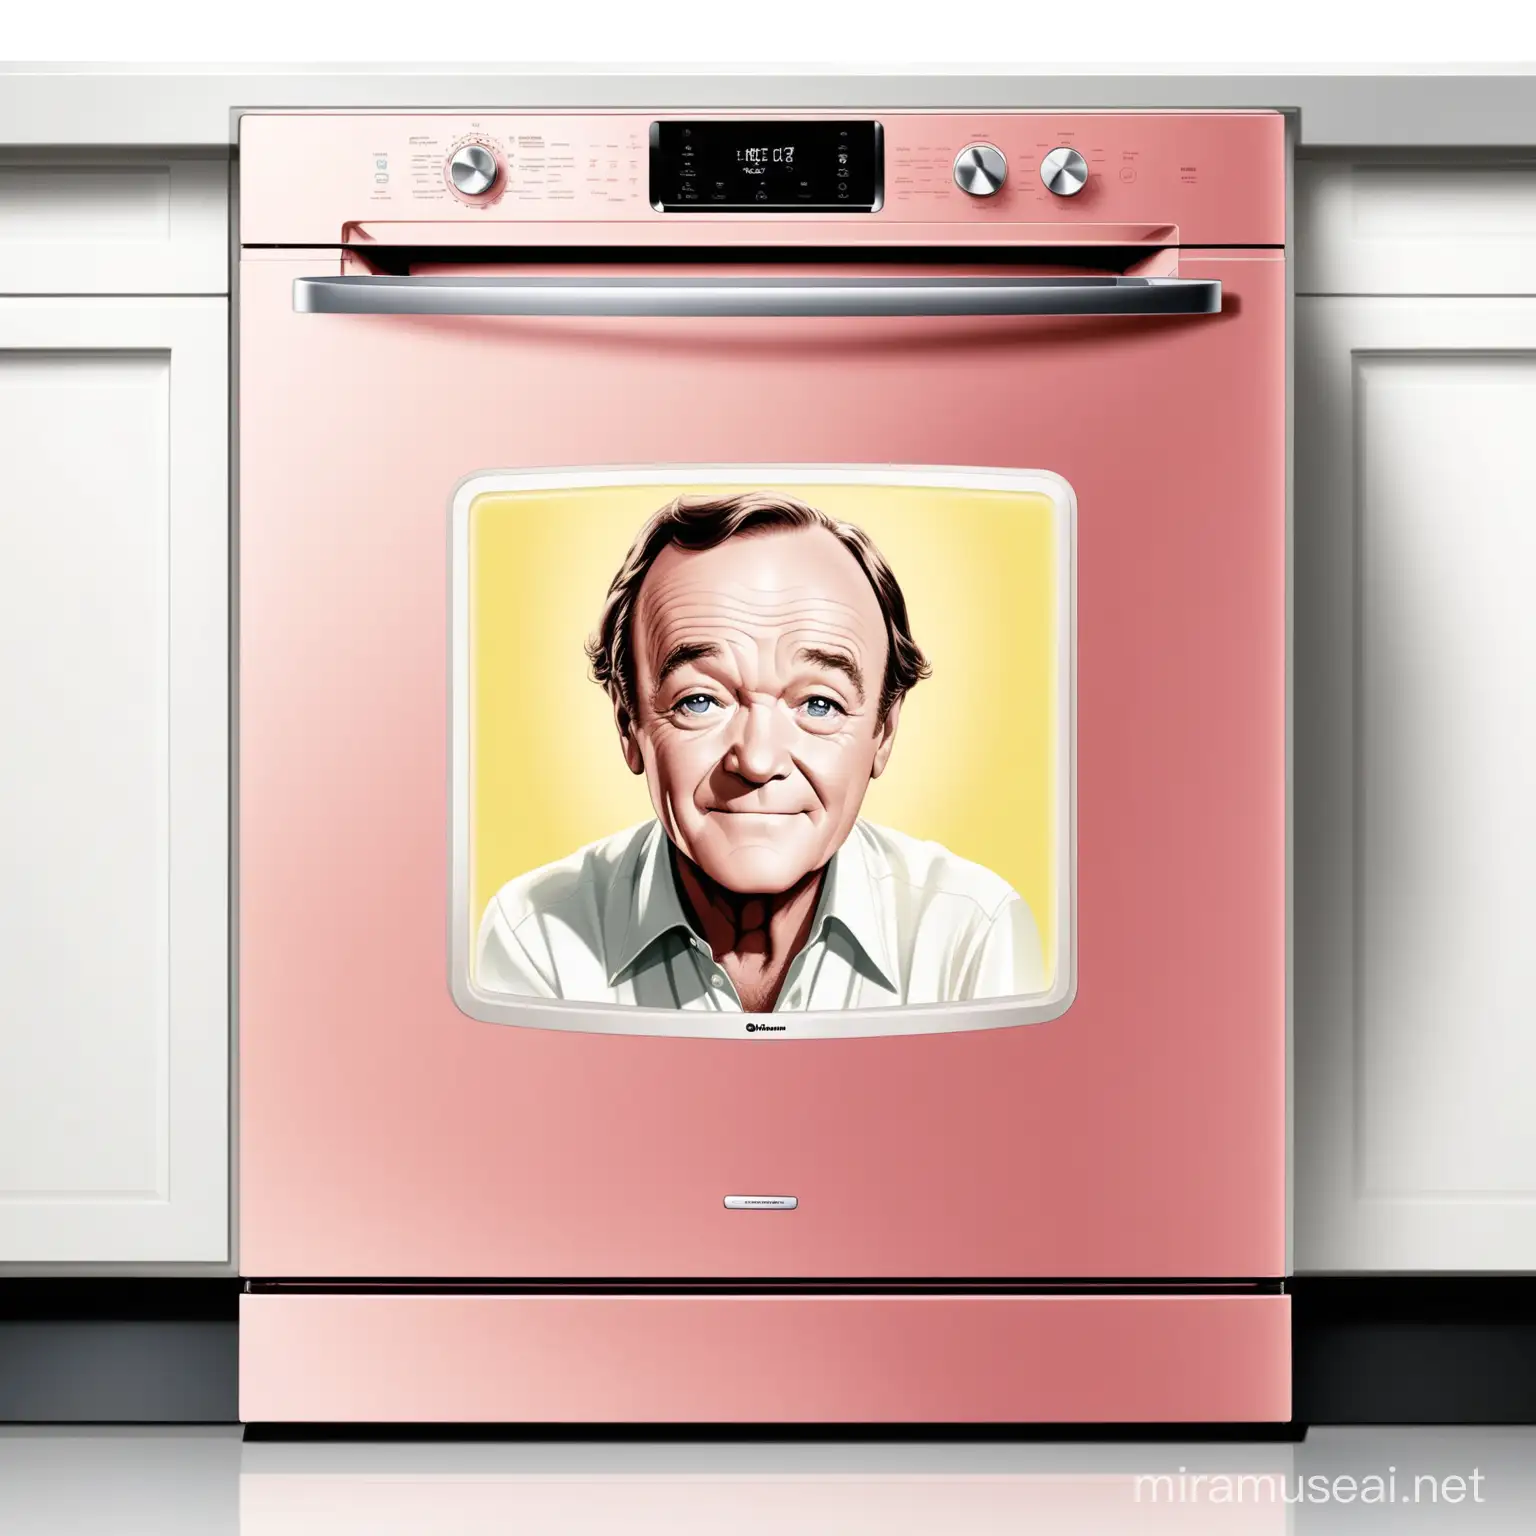 Jack Lemmon with Smart Dishwasher in Light Pink and Yellow